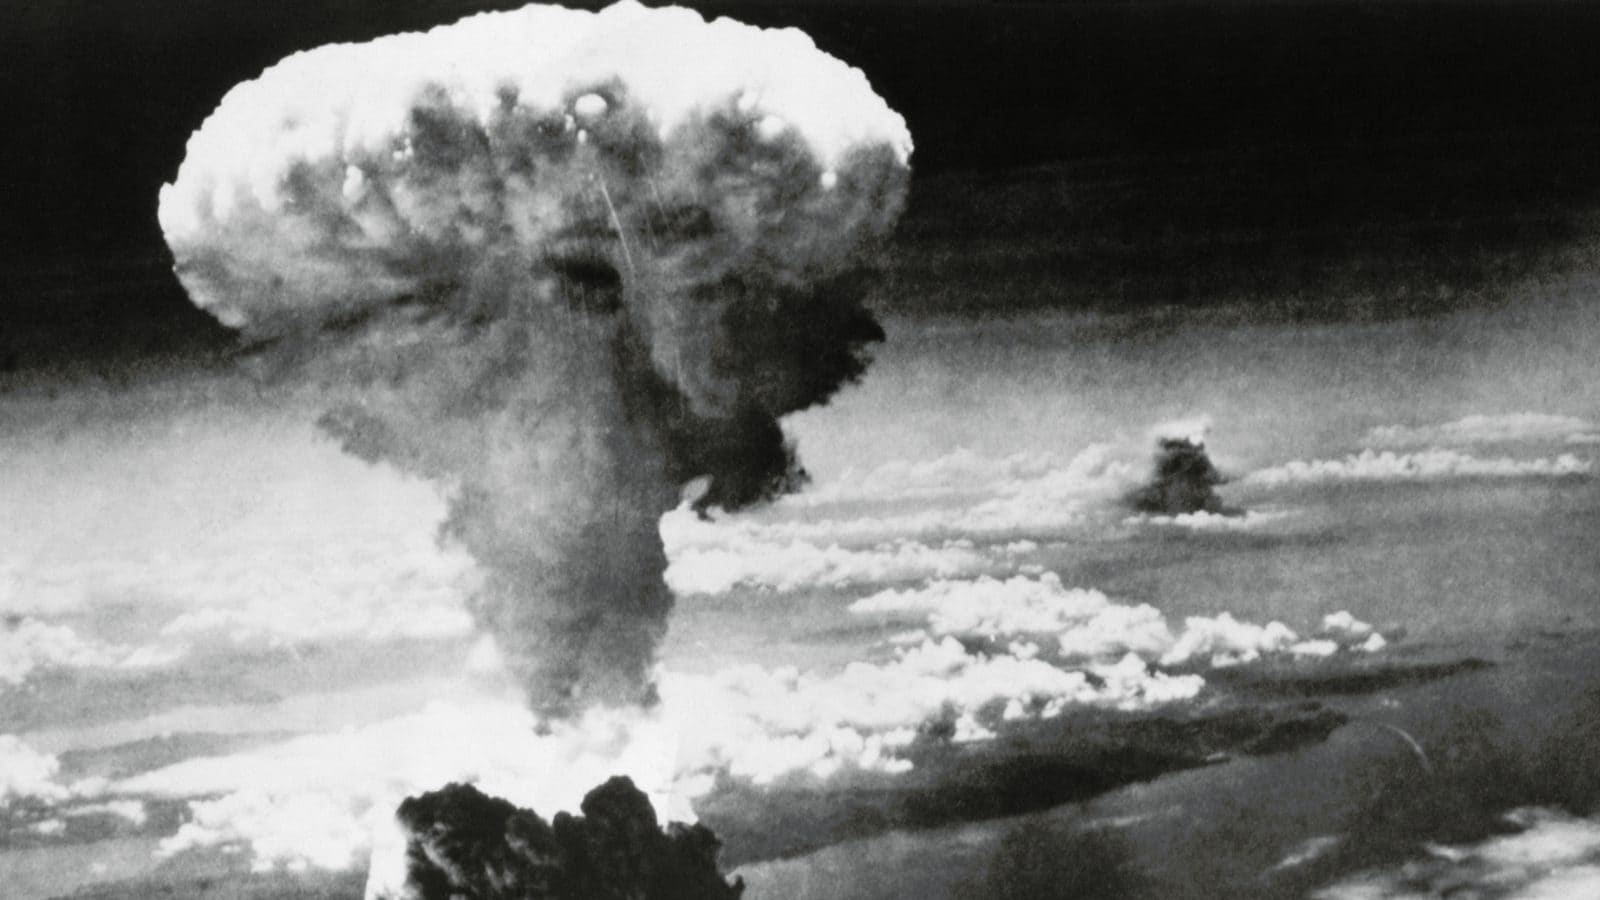 This Day In 1945 The Atomic Bomb Was Dropped On Nagasaki India News Republic